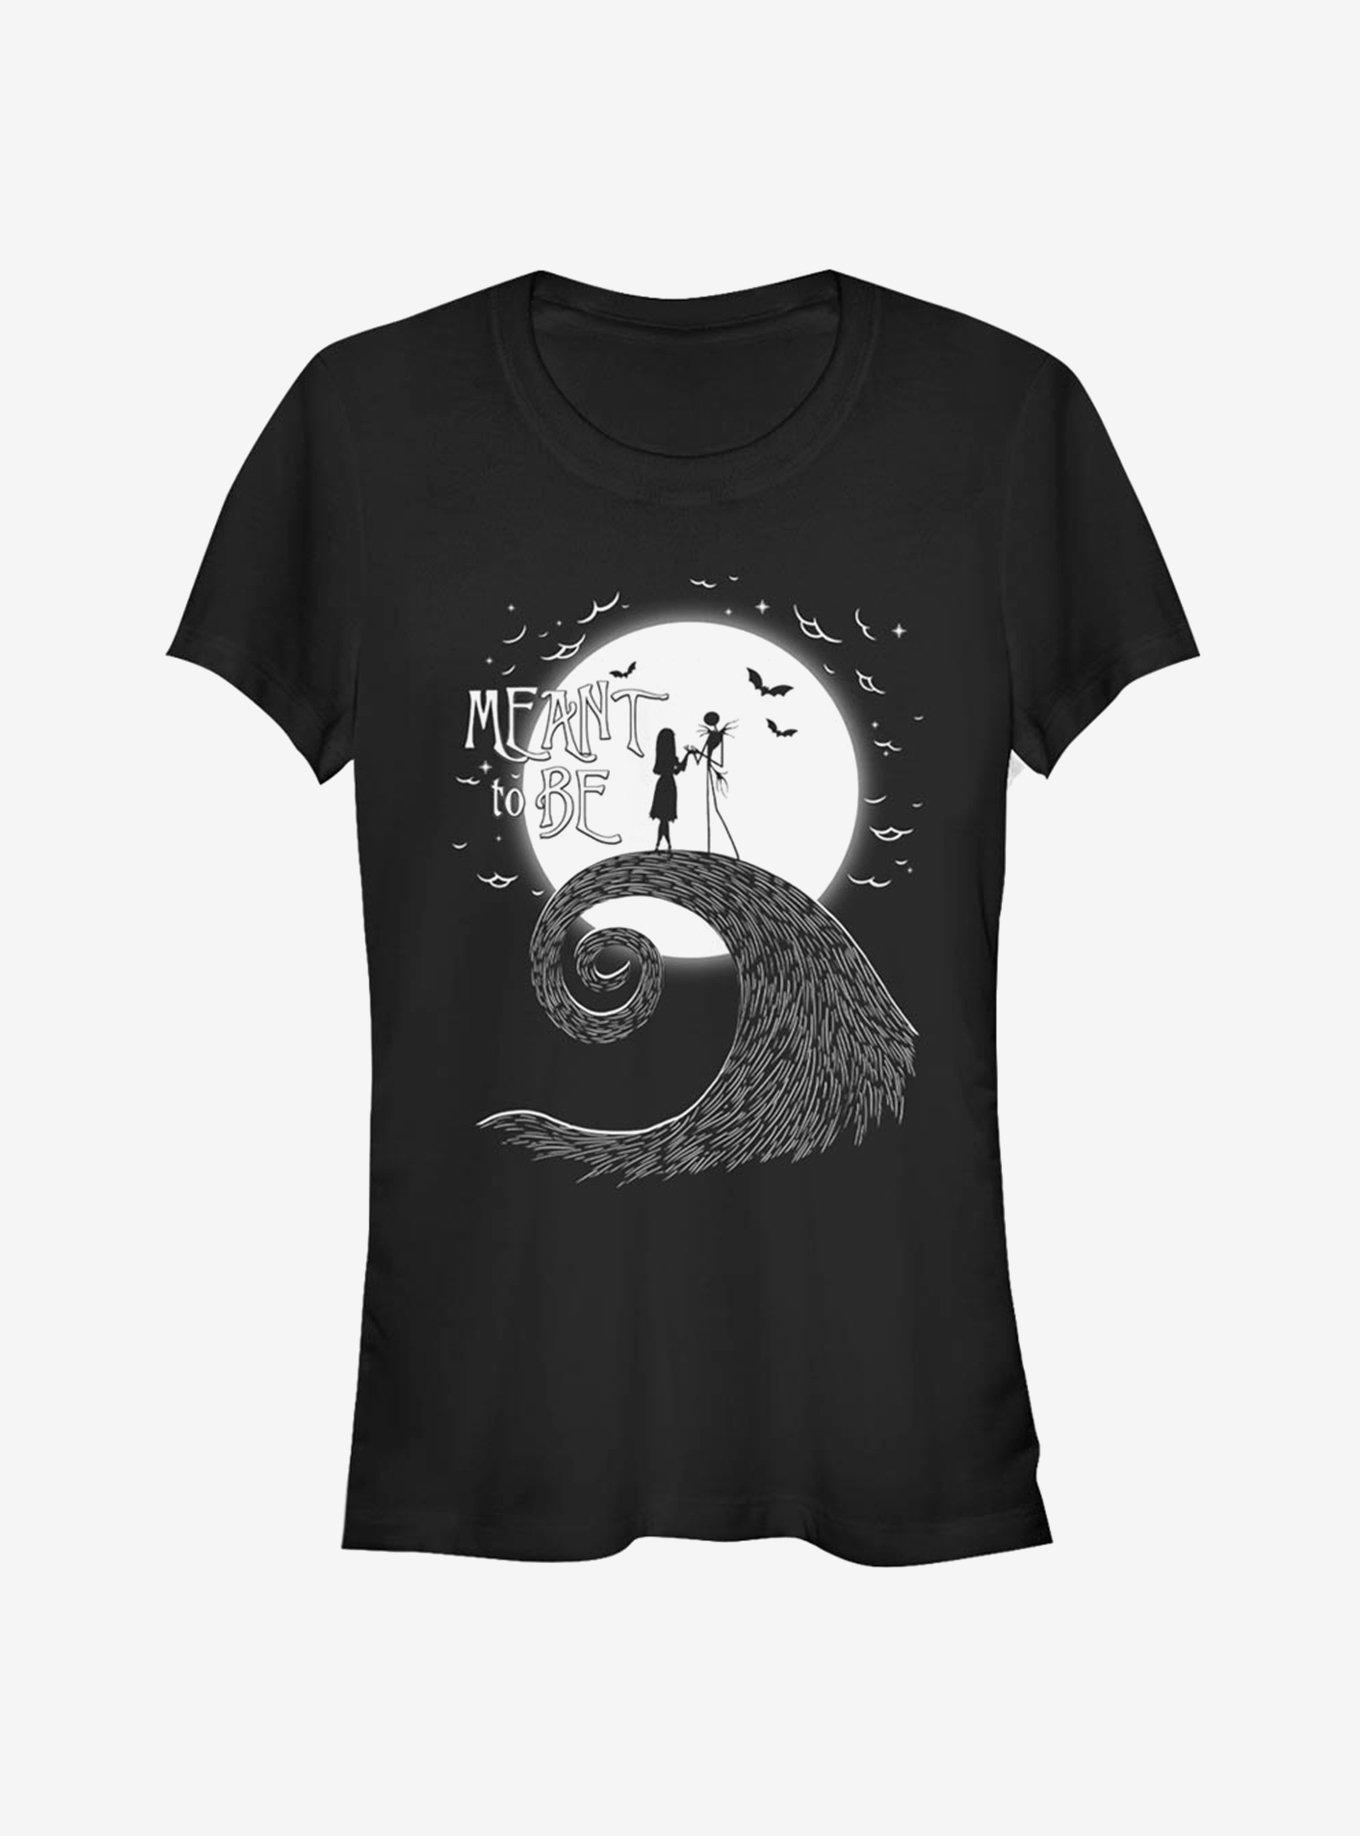 The Nightmare Before Christmas Jack & Sally Meant To Be Girls T-Shirt, BLACK, hi-res